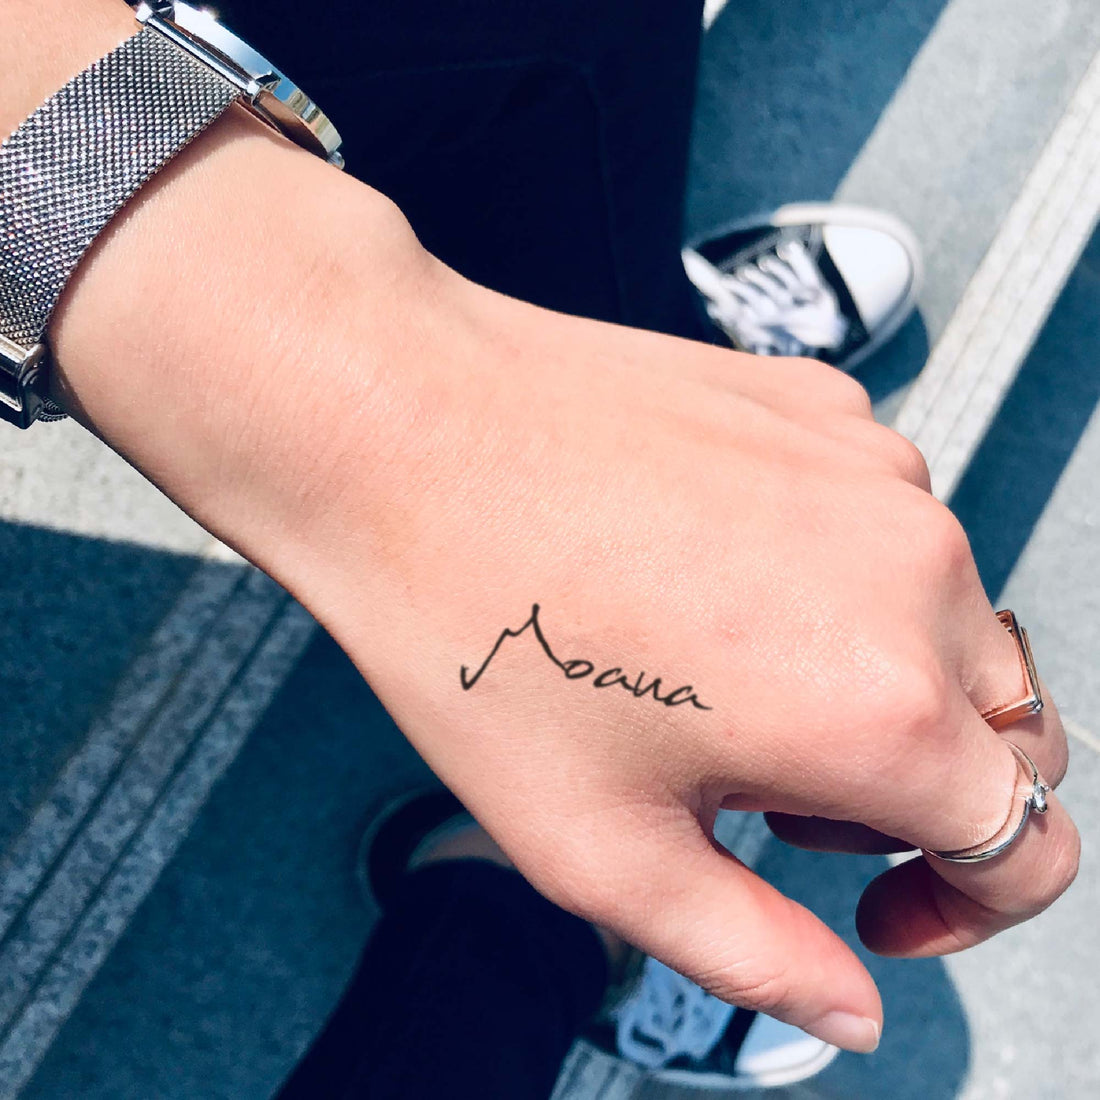 Moana custom temporary tattoo sticker design idea inspiration meanings removal arm wrist hand words font name signature calligraphy lyrics tour concert outfits merch accessory gift souvenir costumes wear dress up code